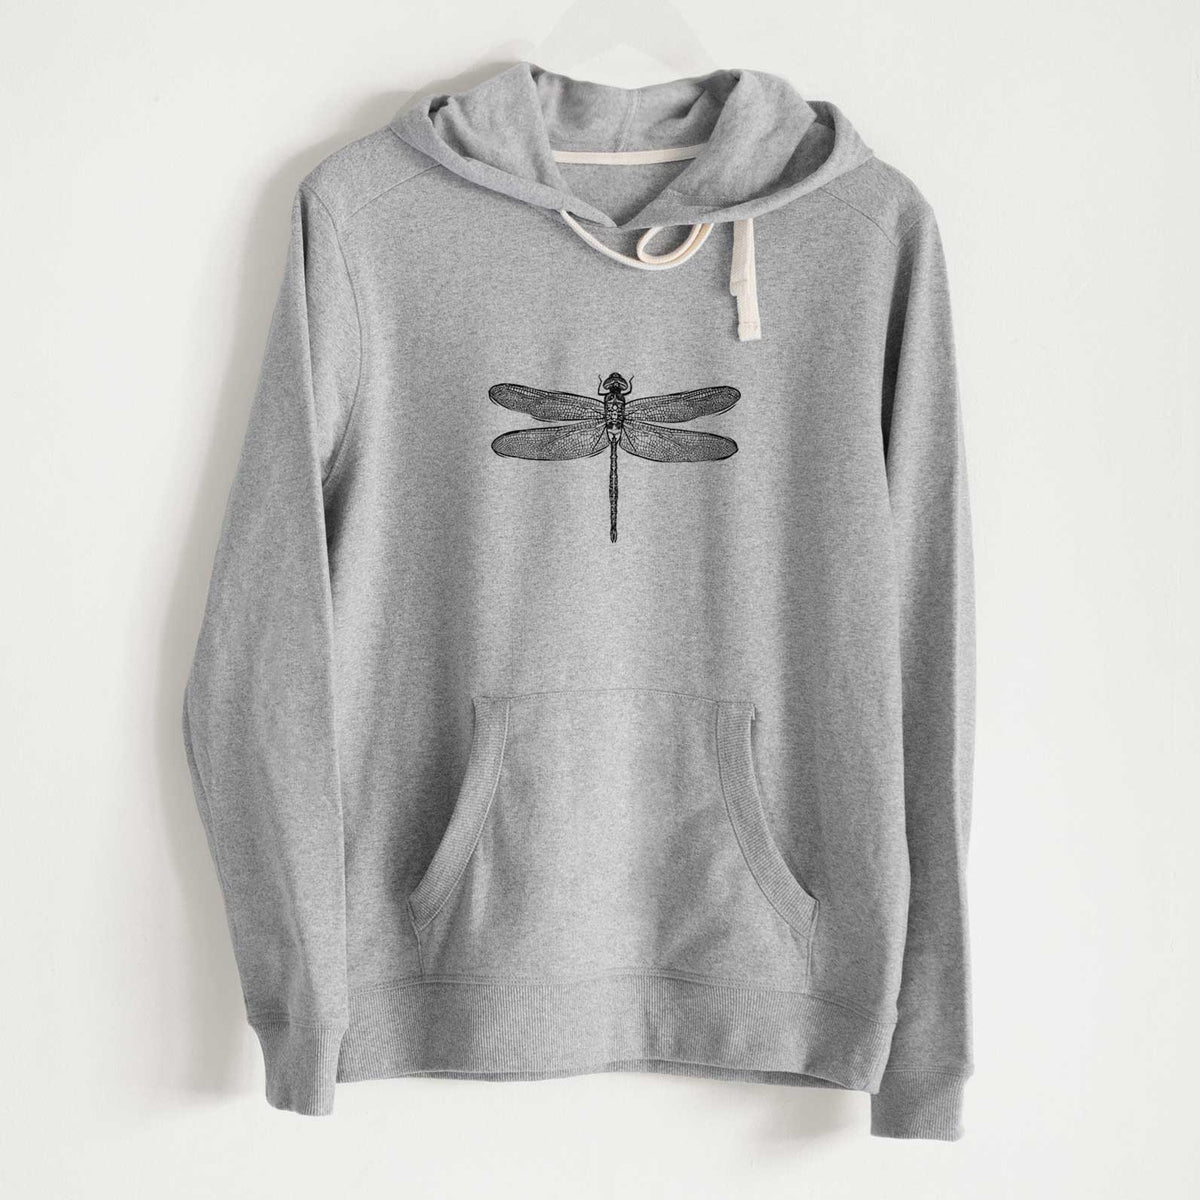 Anax Junius - Green Darner Dragonfly - Unisex Recycled Hoodie - CLOSEOUT - FINAL SALE